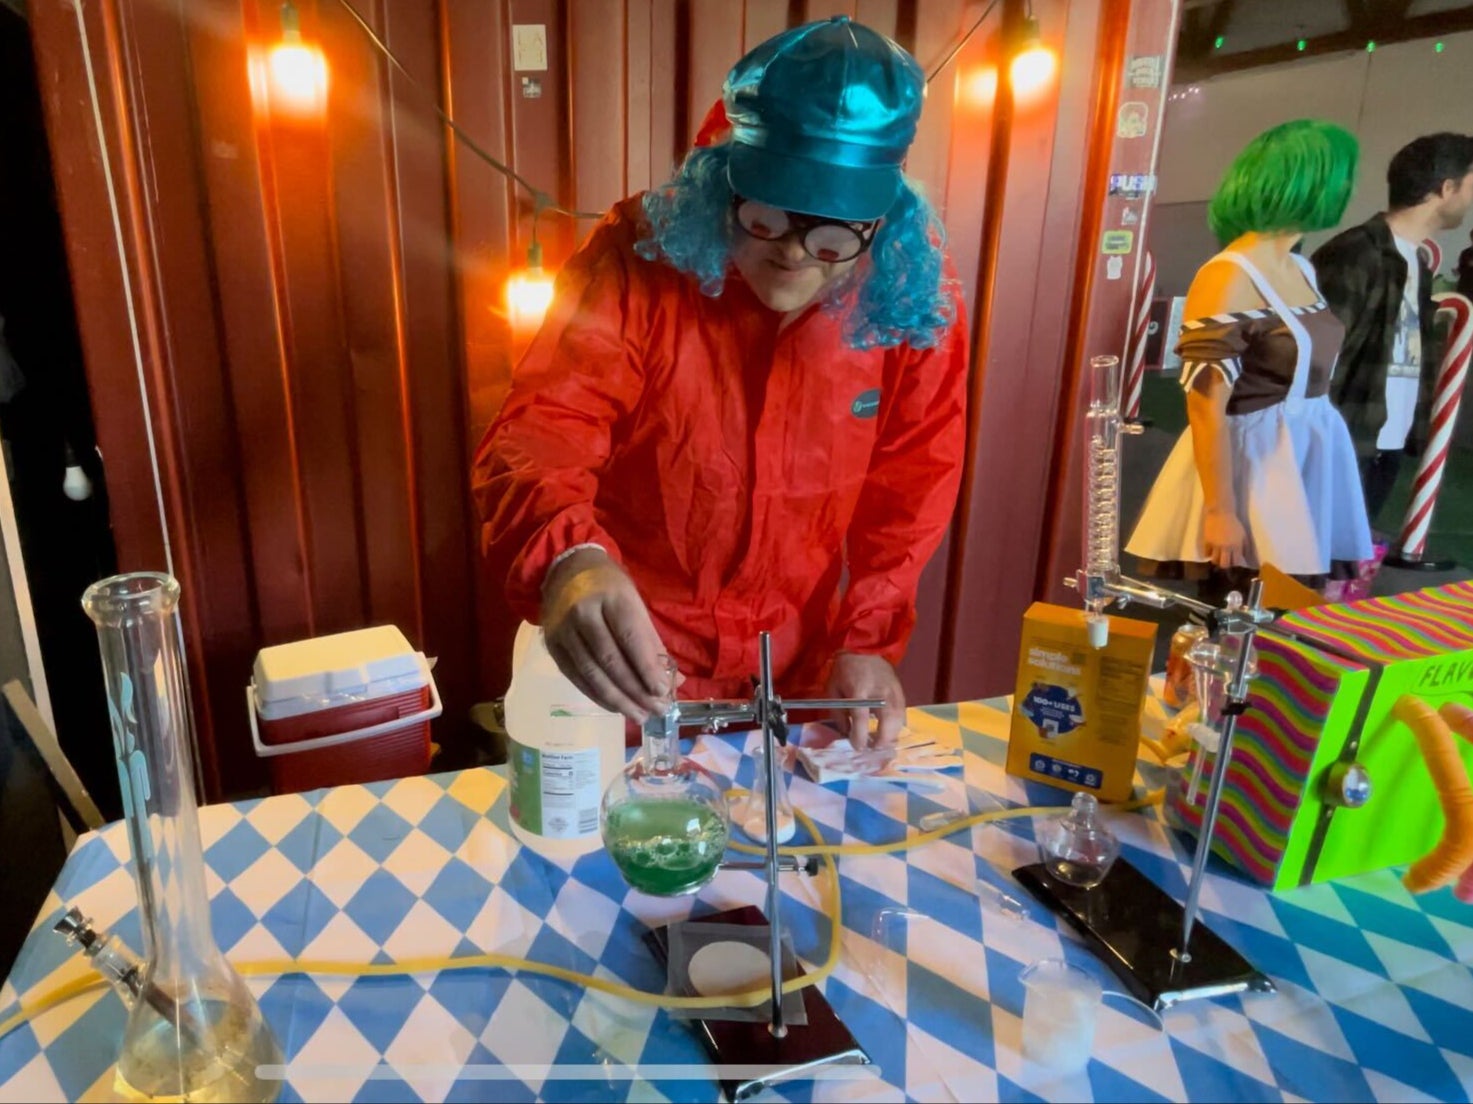 The head Oompa Loompa creates a concoction with lab tools and a bong at the Willy Wonka Experience in Downtown Los Angeles, California on 28 April.